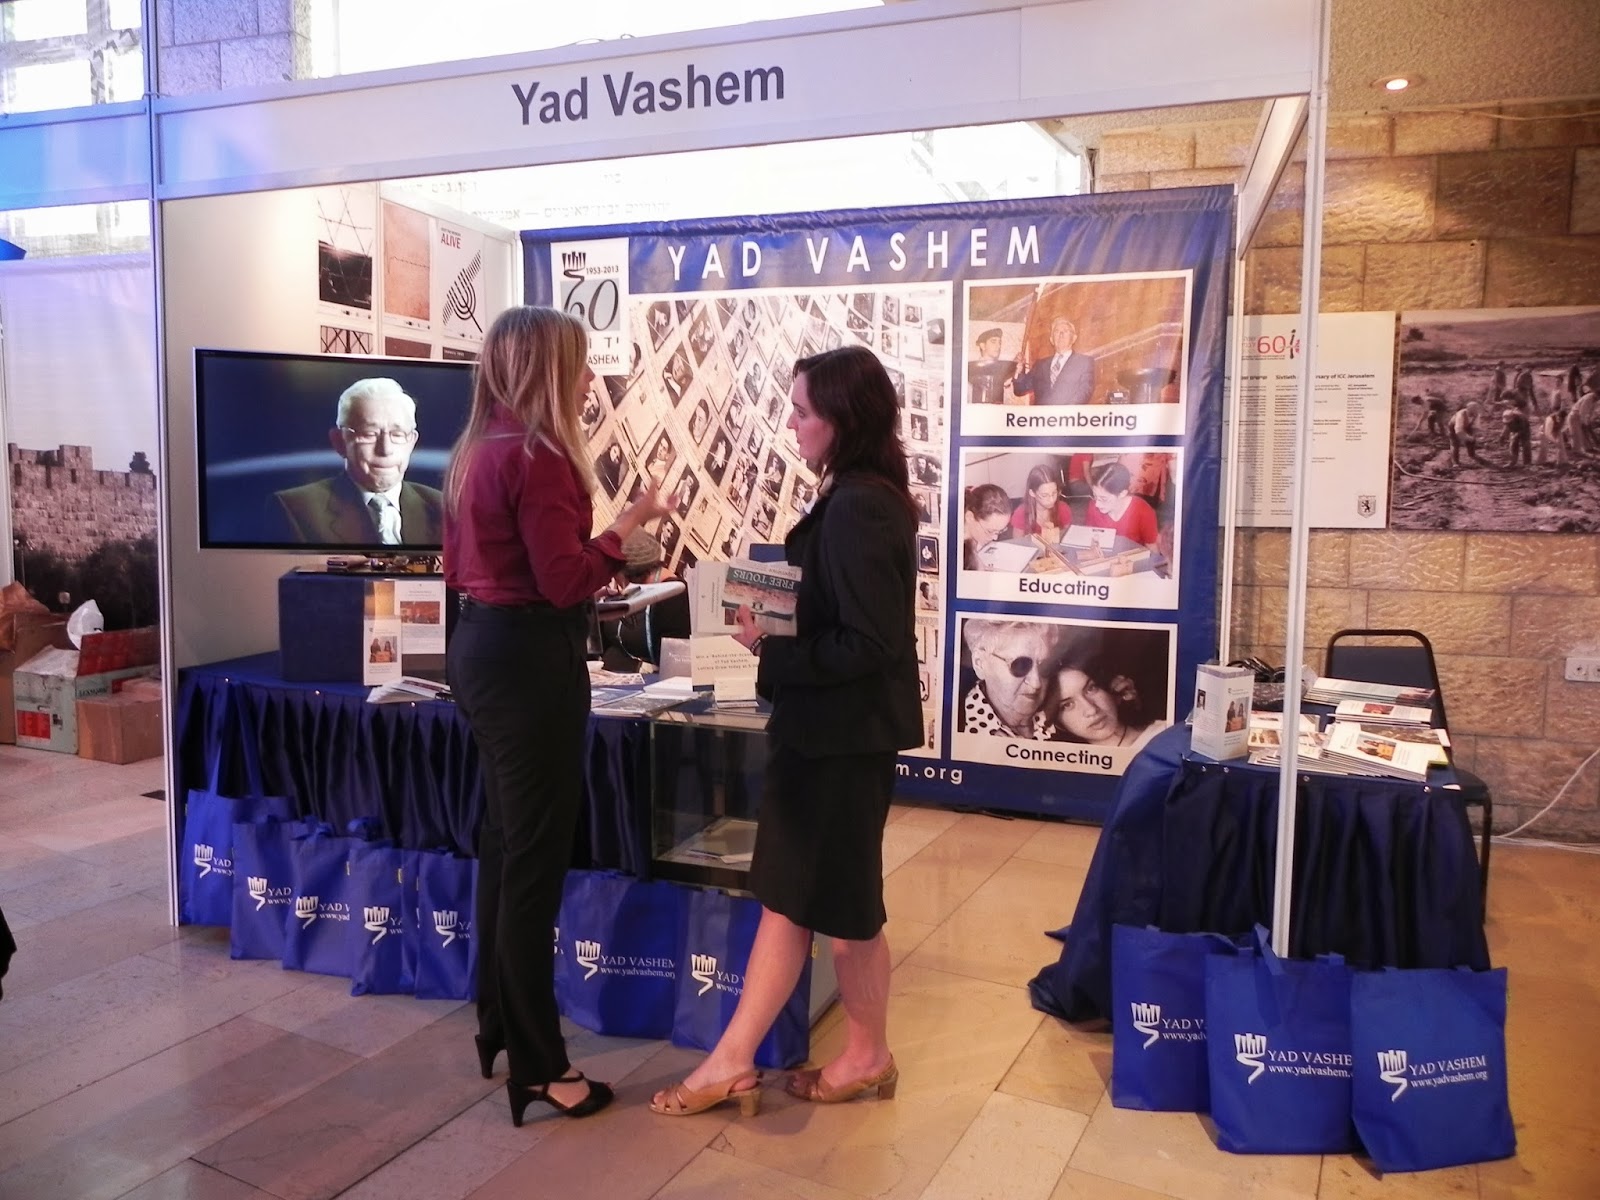 Yad Vashem's booth at the General Assembly of The Jewish Federations of North America